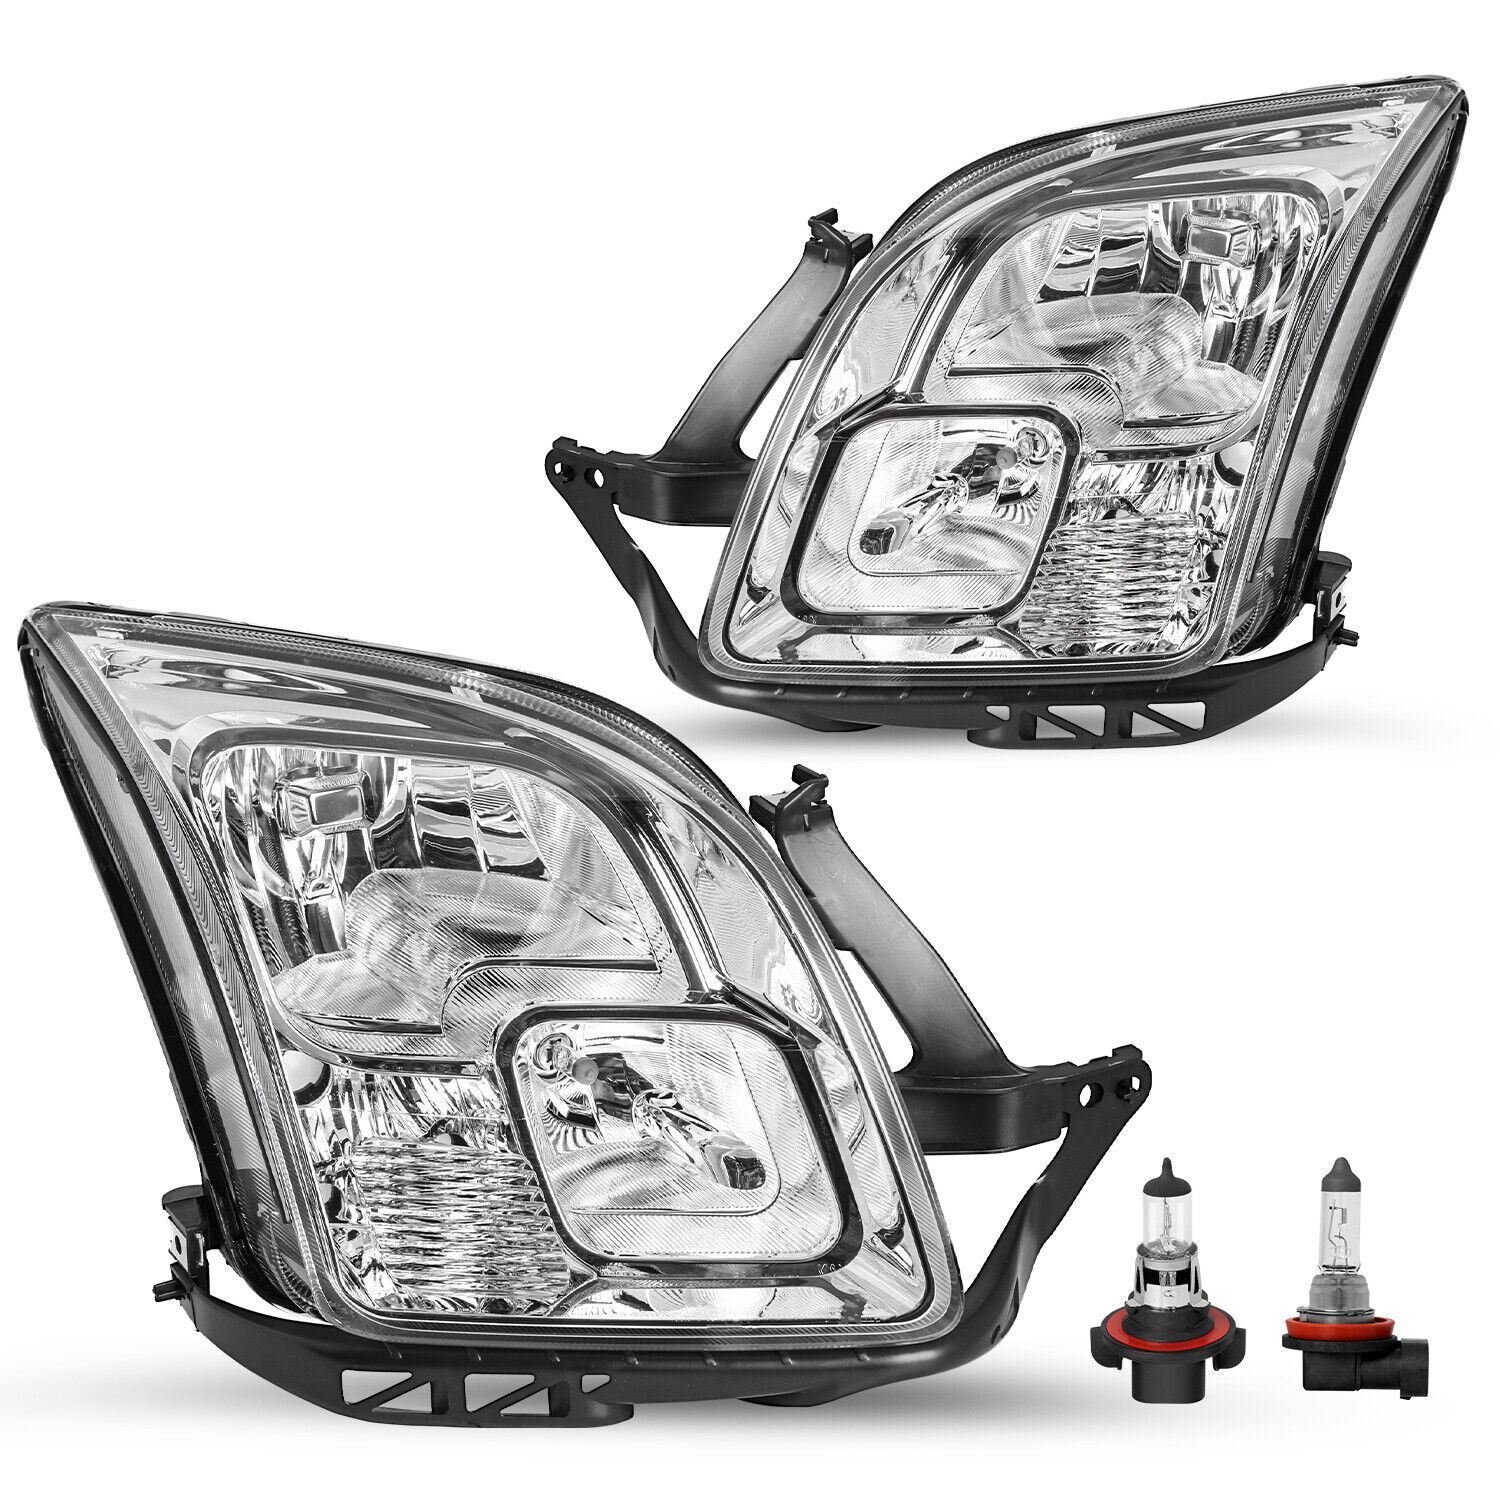 For 2006-2009 Ford Fusion Factory Style Headlights Headlamps Pair W/bulb